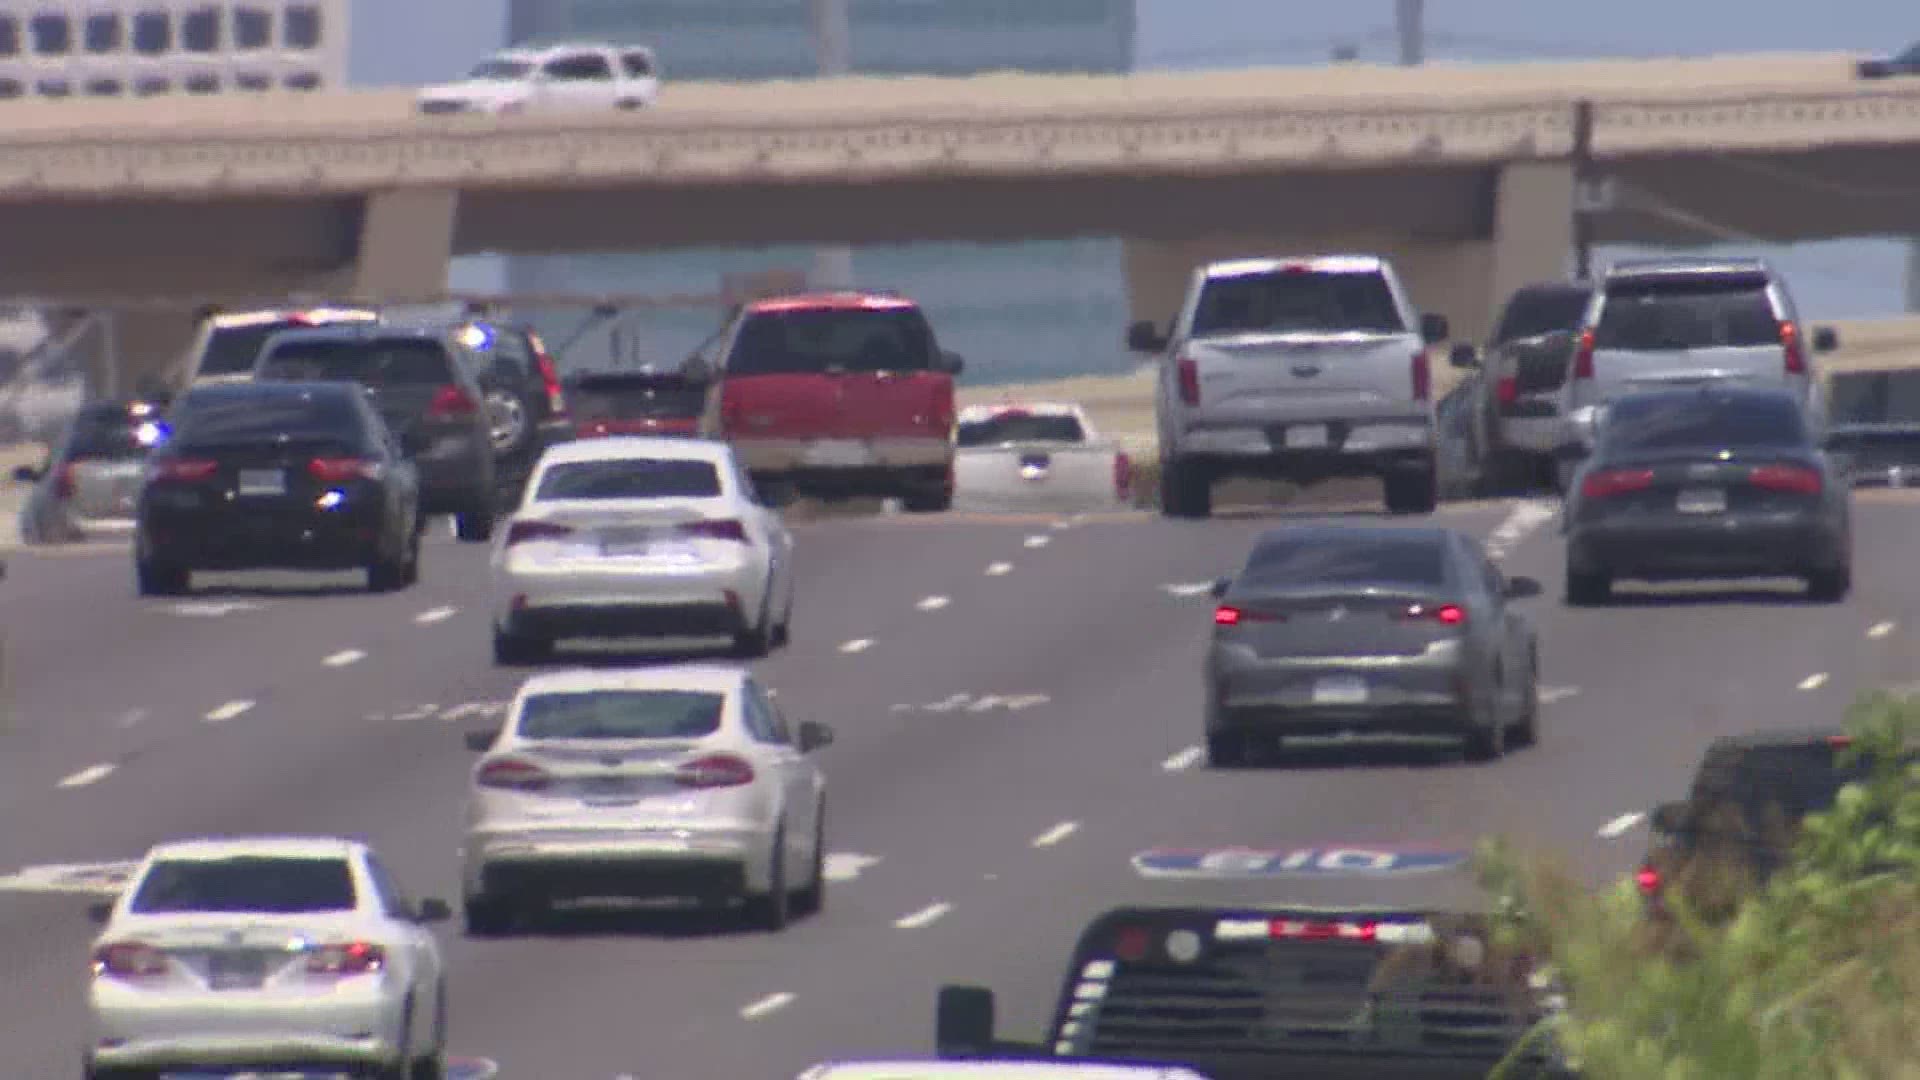 Experts said the slowdown resulted in 27 fewer hours spent sitting in traffic for the average Houston driver in 2020 compared to 2019.